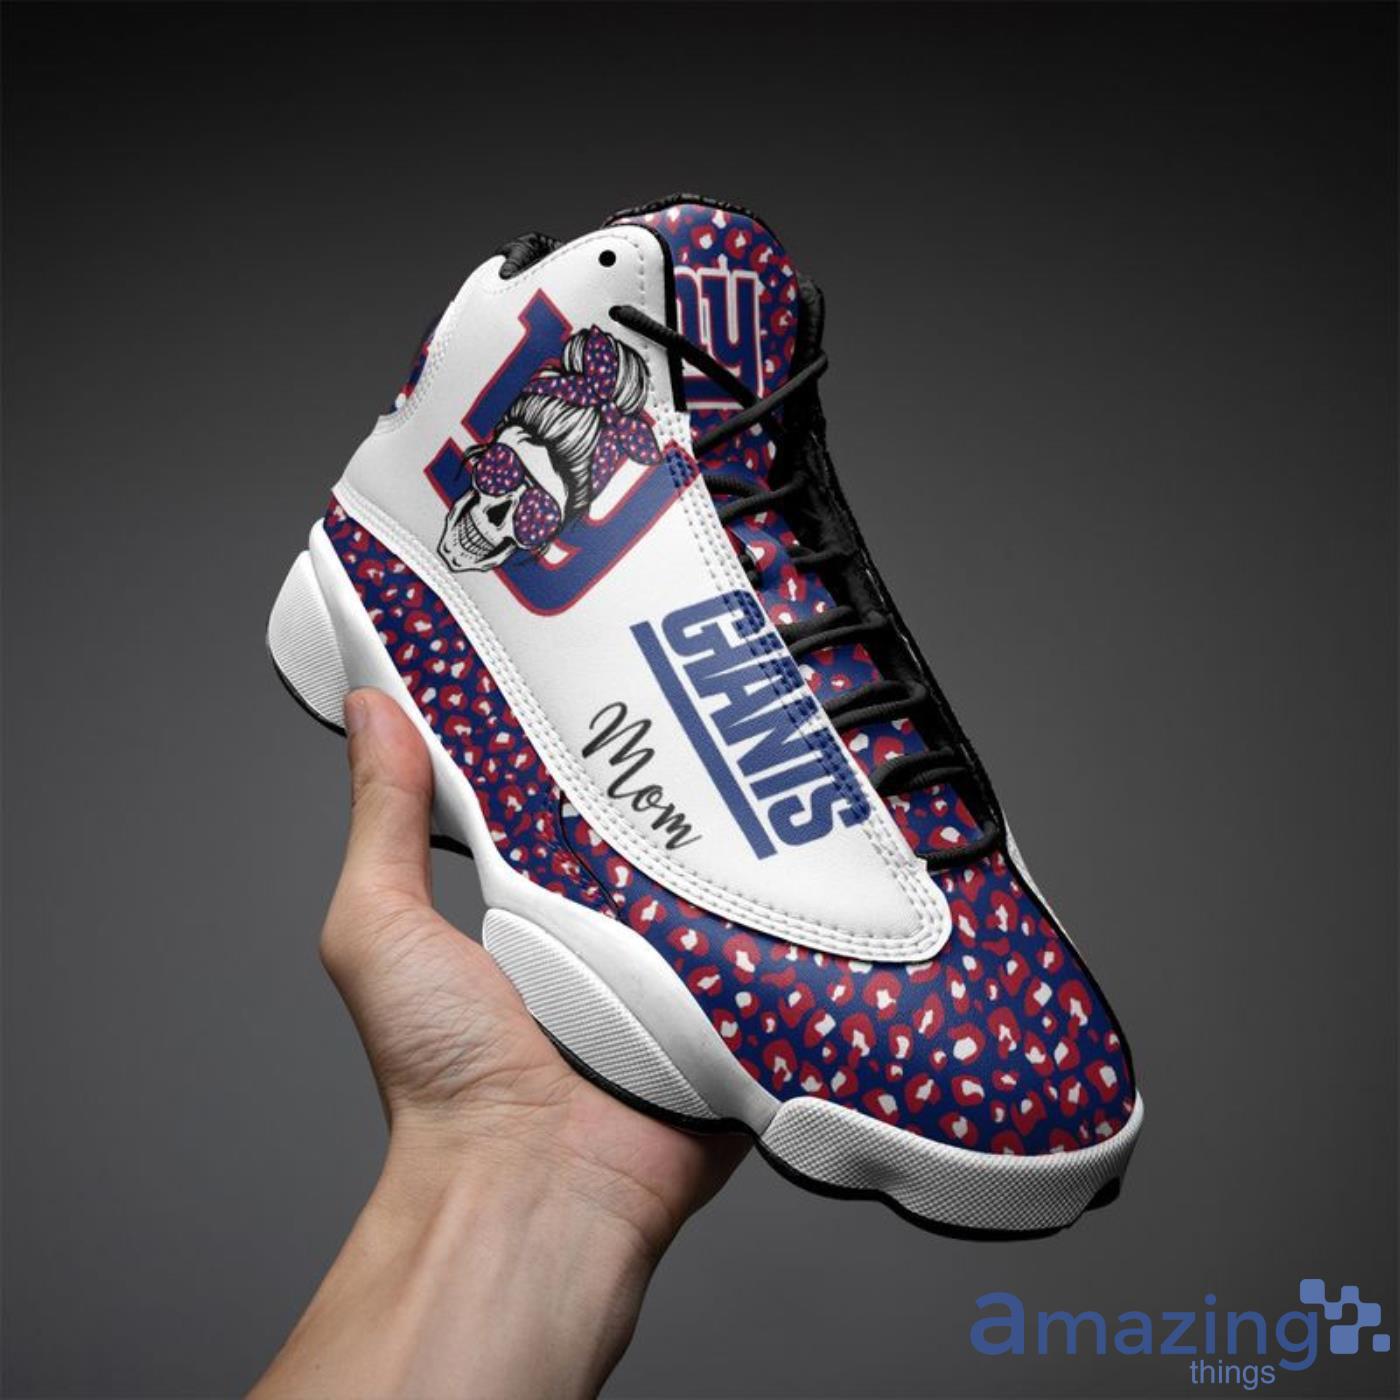 New York Giants Limited Edition Air Jordan 13 Sneaker For Fans